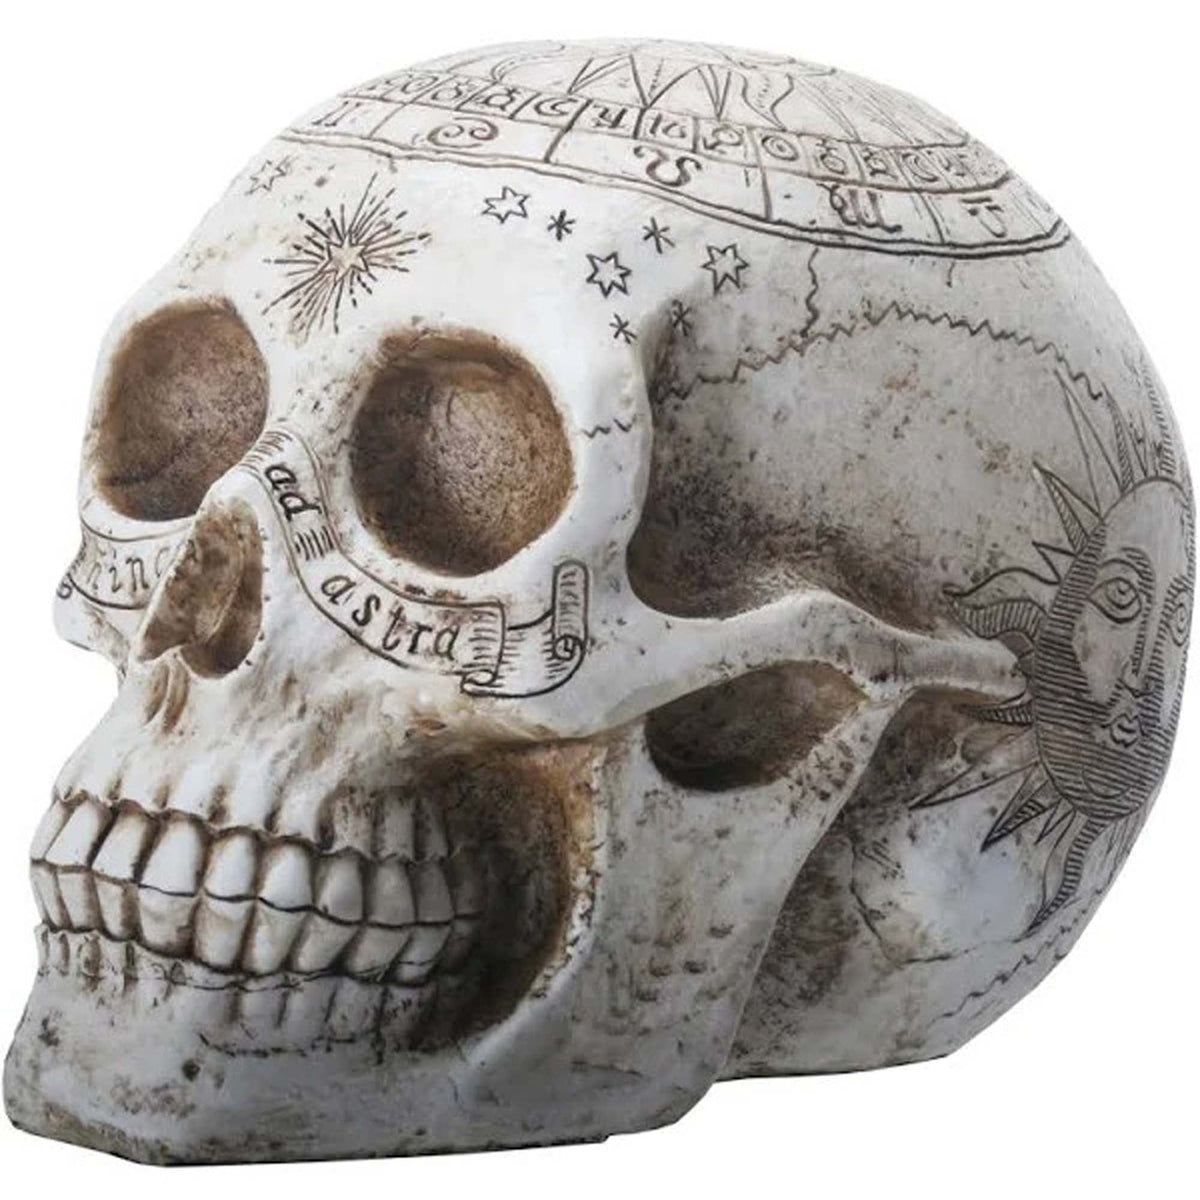 SUNSTAR INDUSTRIES Halloween Fortune Telling Skull, 7 Inches, 1 Count